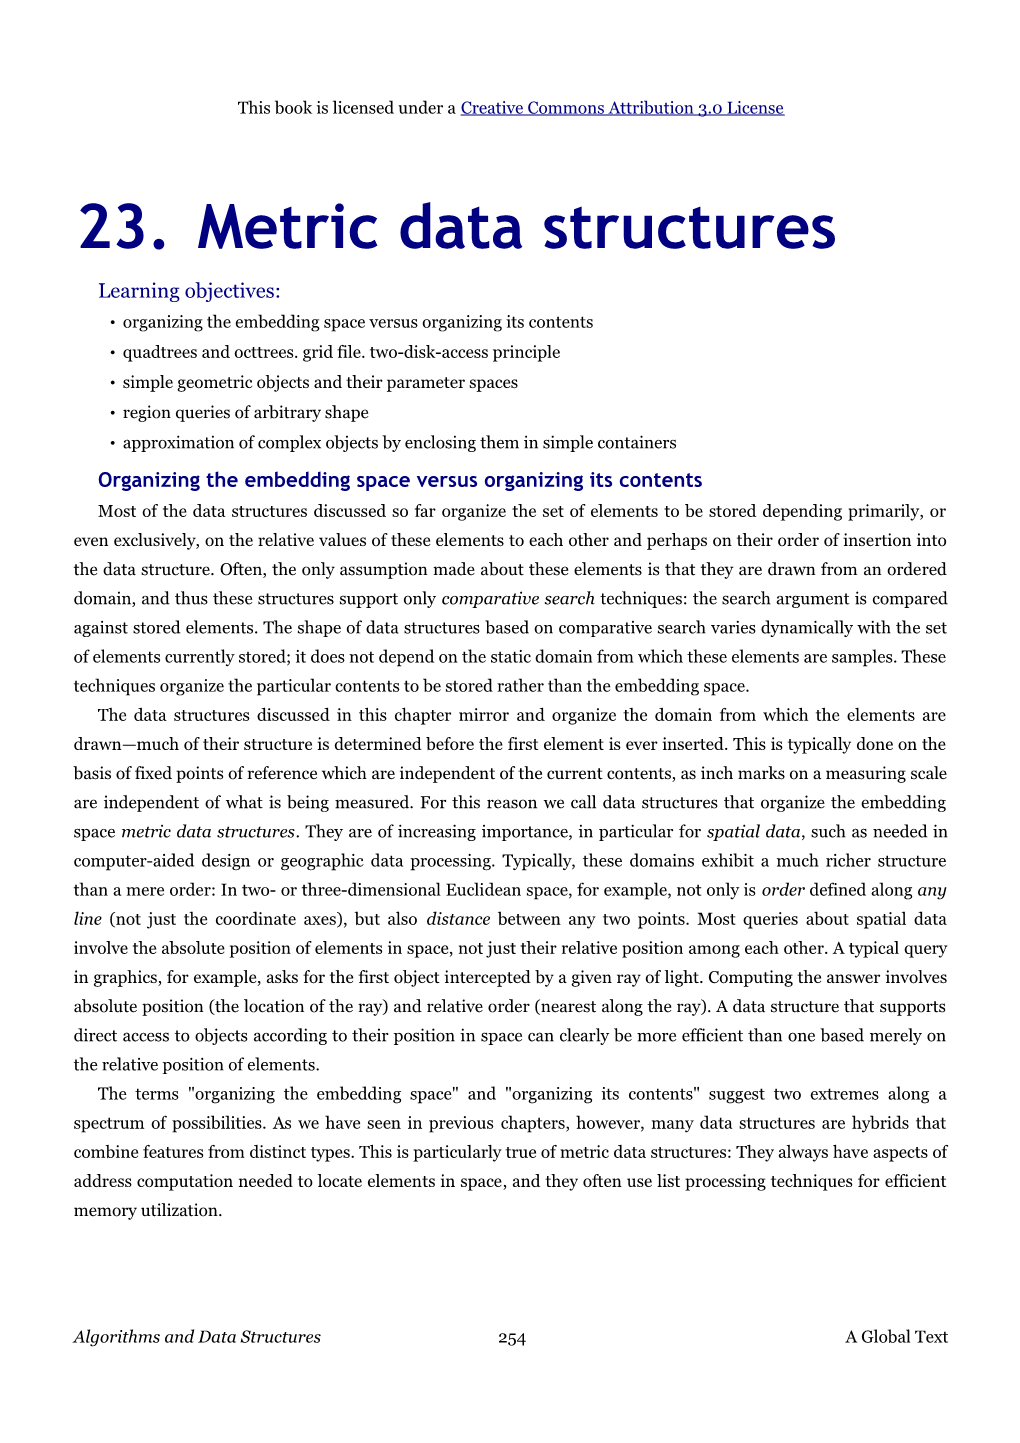 23. Metric Data Structures